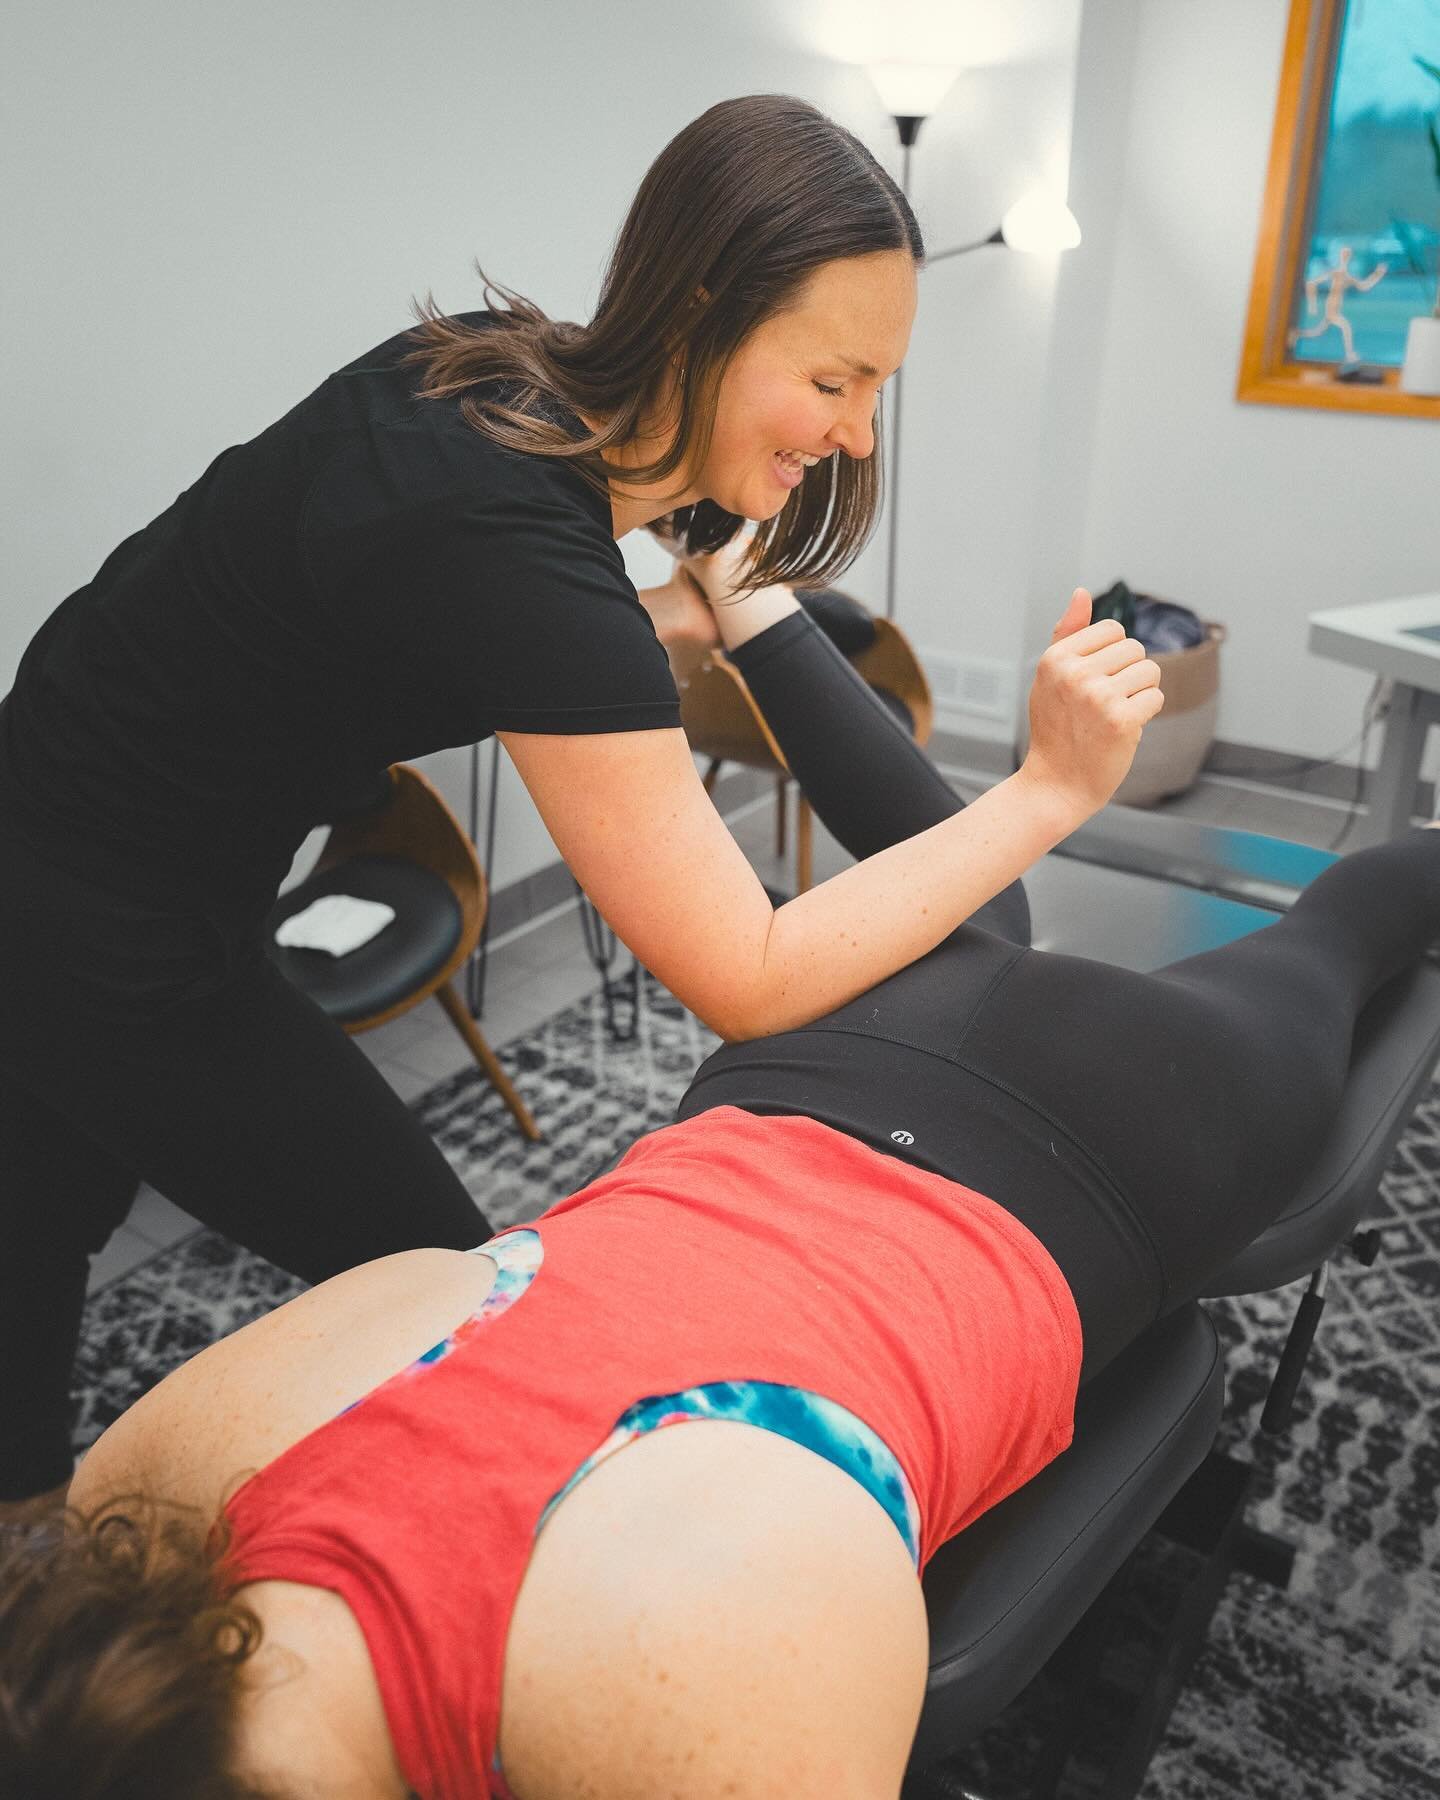 **THIS WEEK ONLY**
Help us Welcome Dr. Hannah to the clinic! We are offering $10 off any appointments booked with her THIS WEEK.  Scheduling available at:

 MoveWellClinic.com